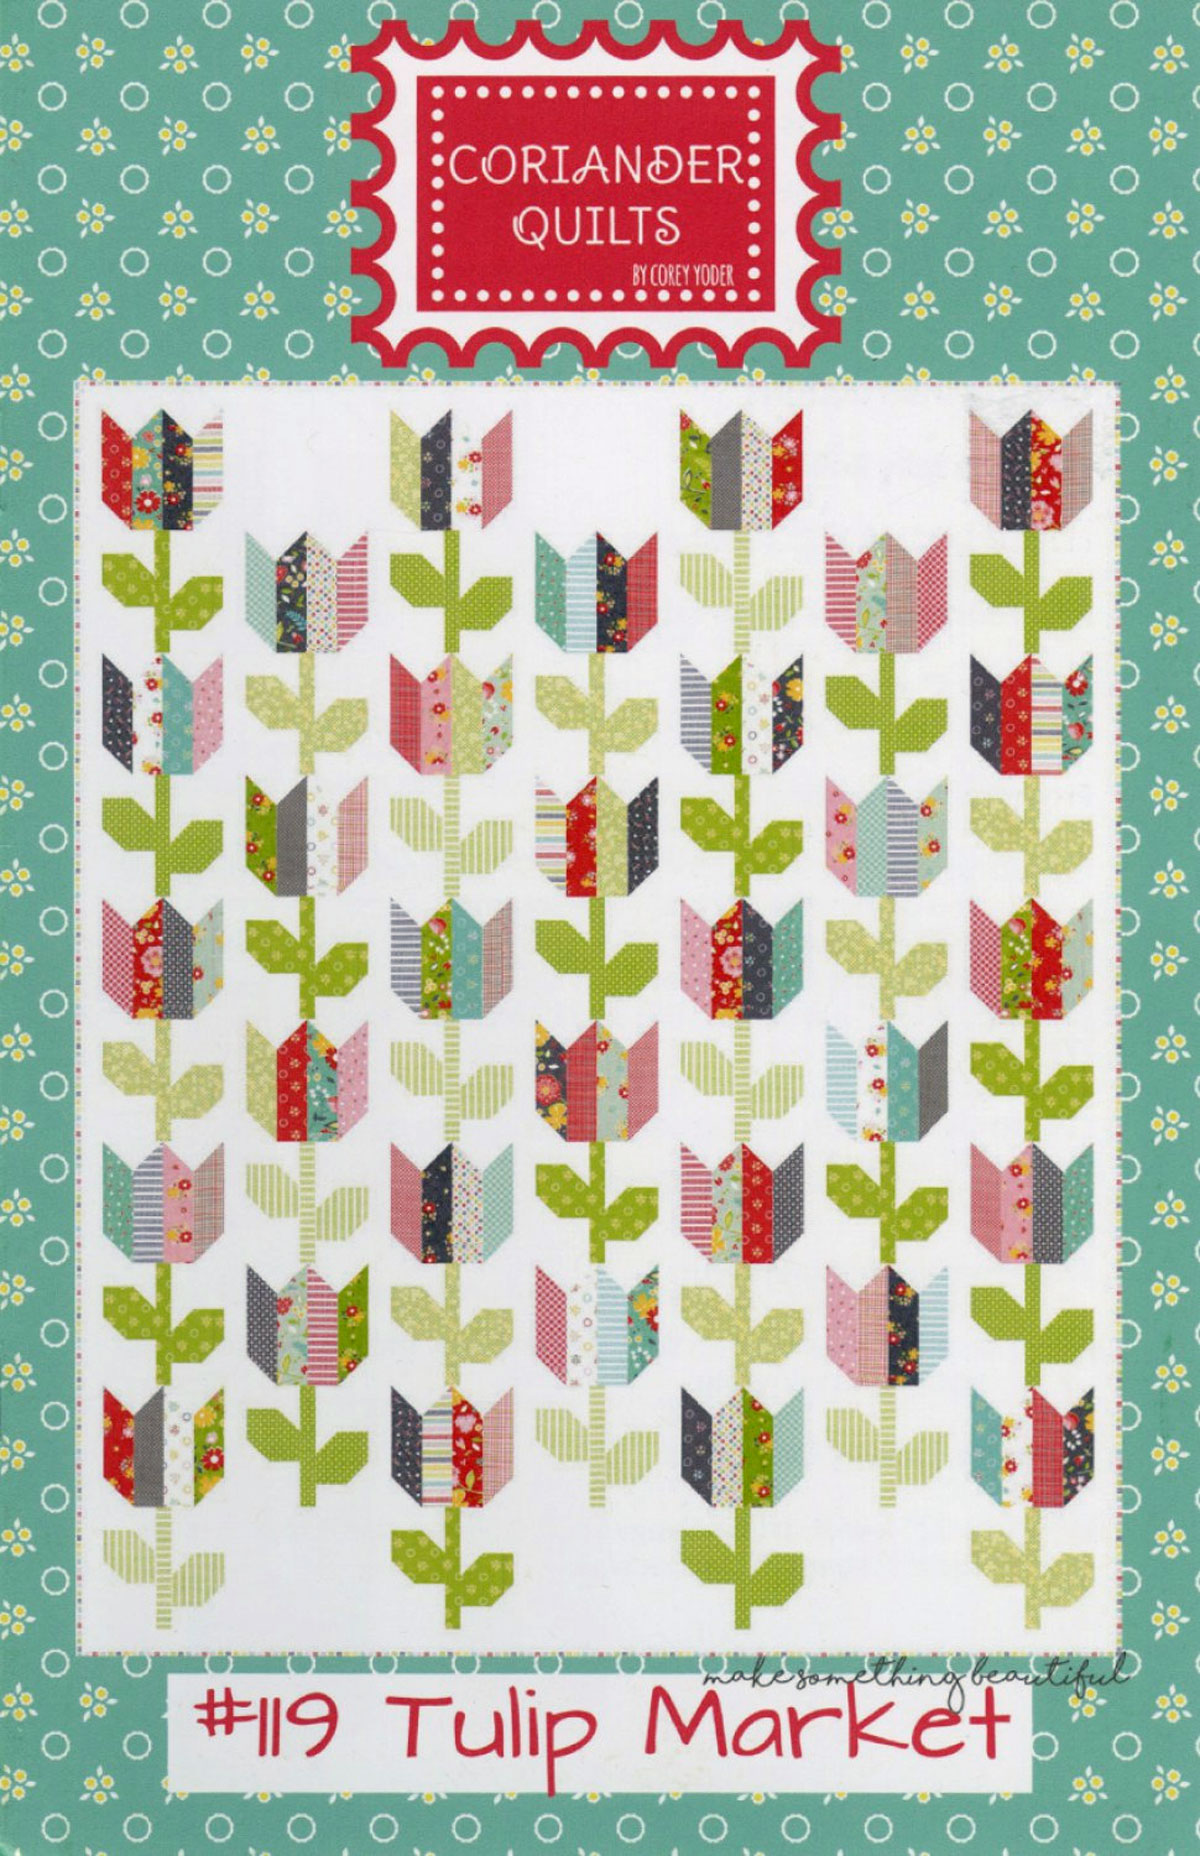 Tulip-Market-quilt-sewing-pattern-Coriander-Quilts-front